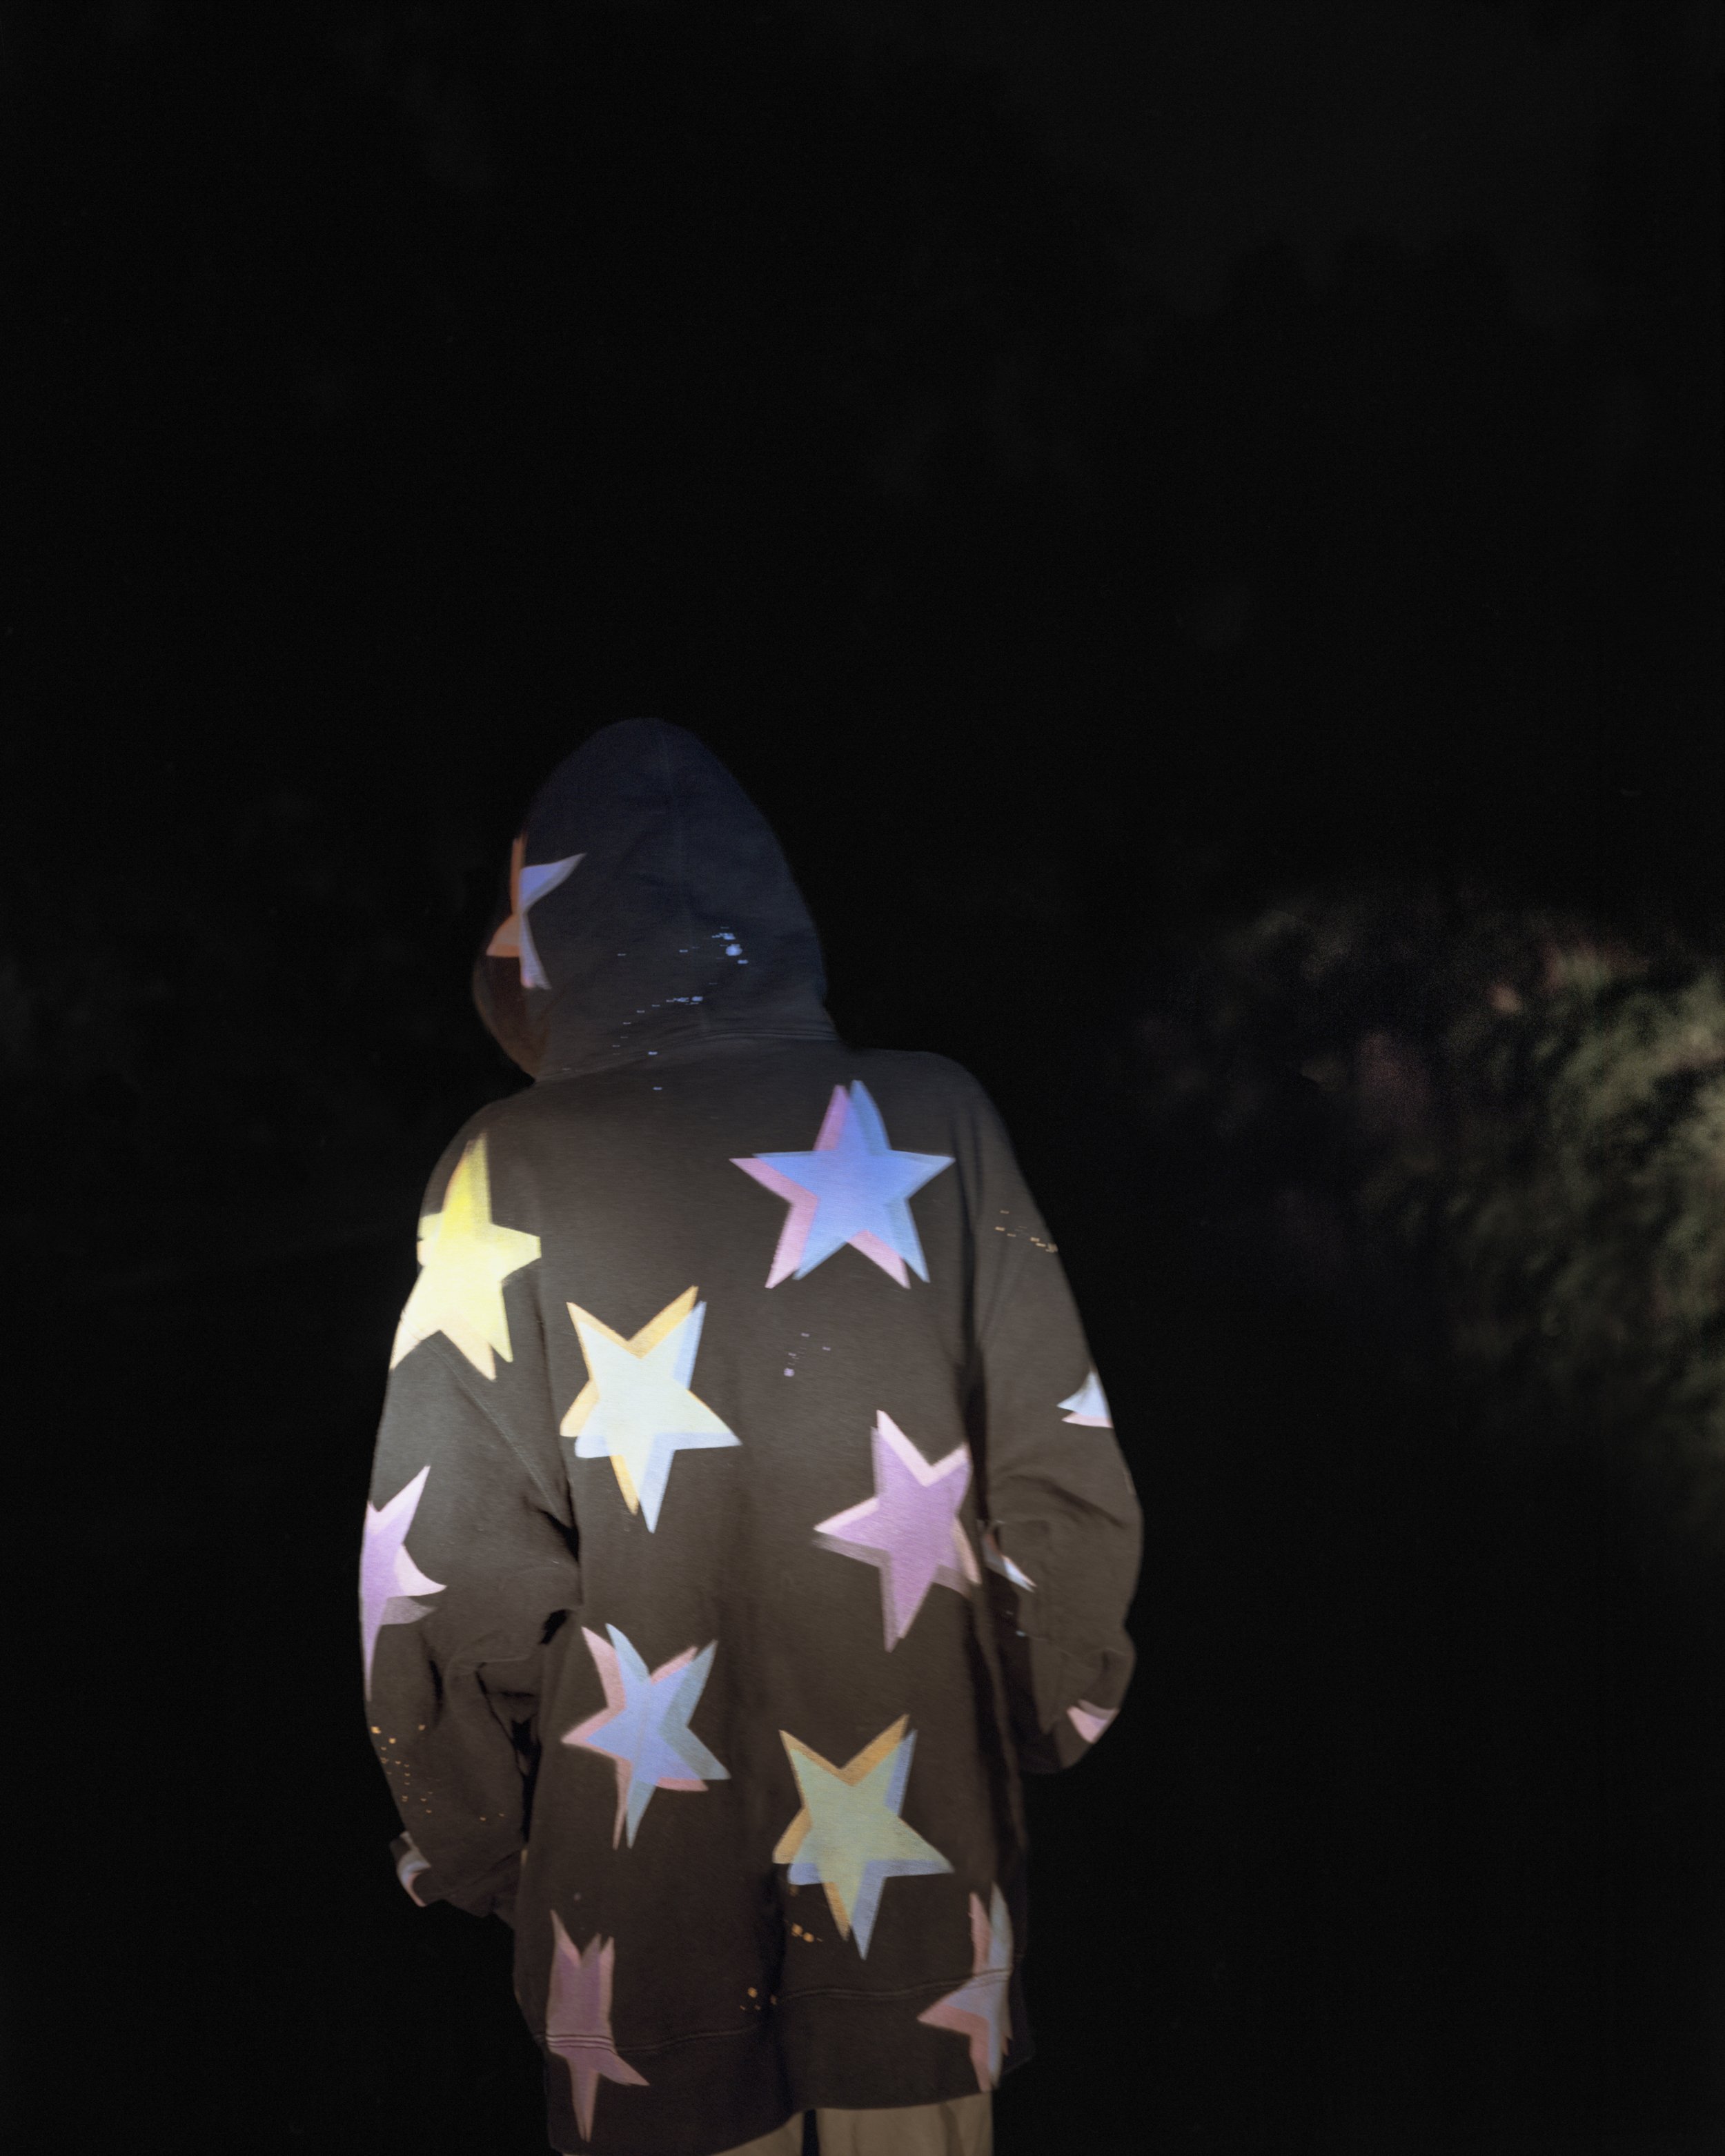  Eli with Star Hoody, 2021 Archival pigment print   Writing    Film    Installation  